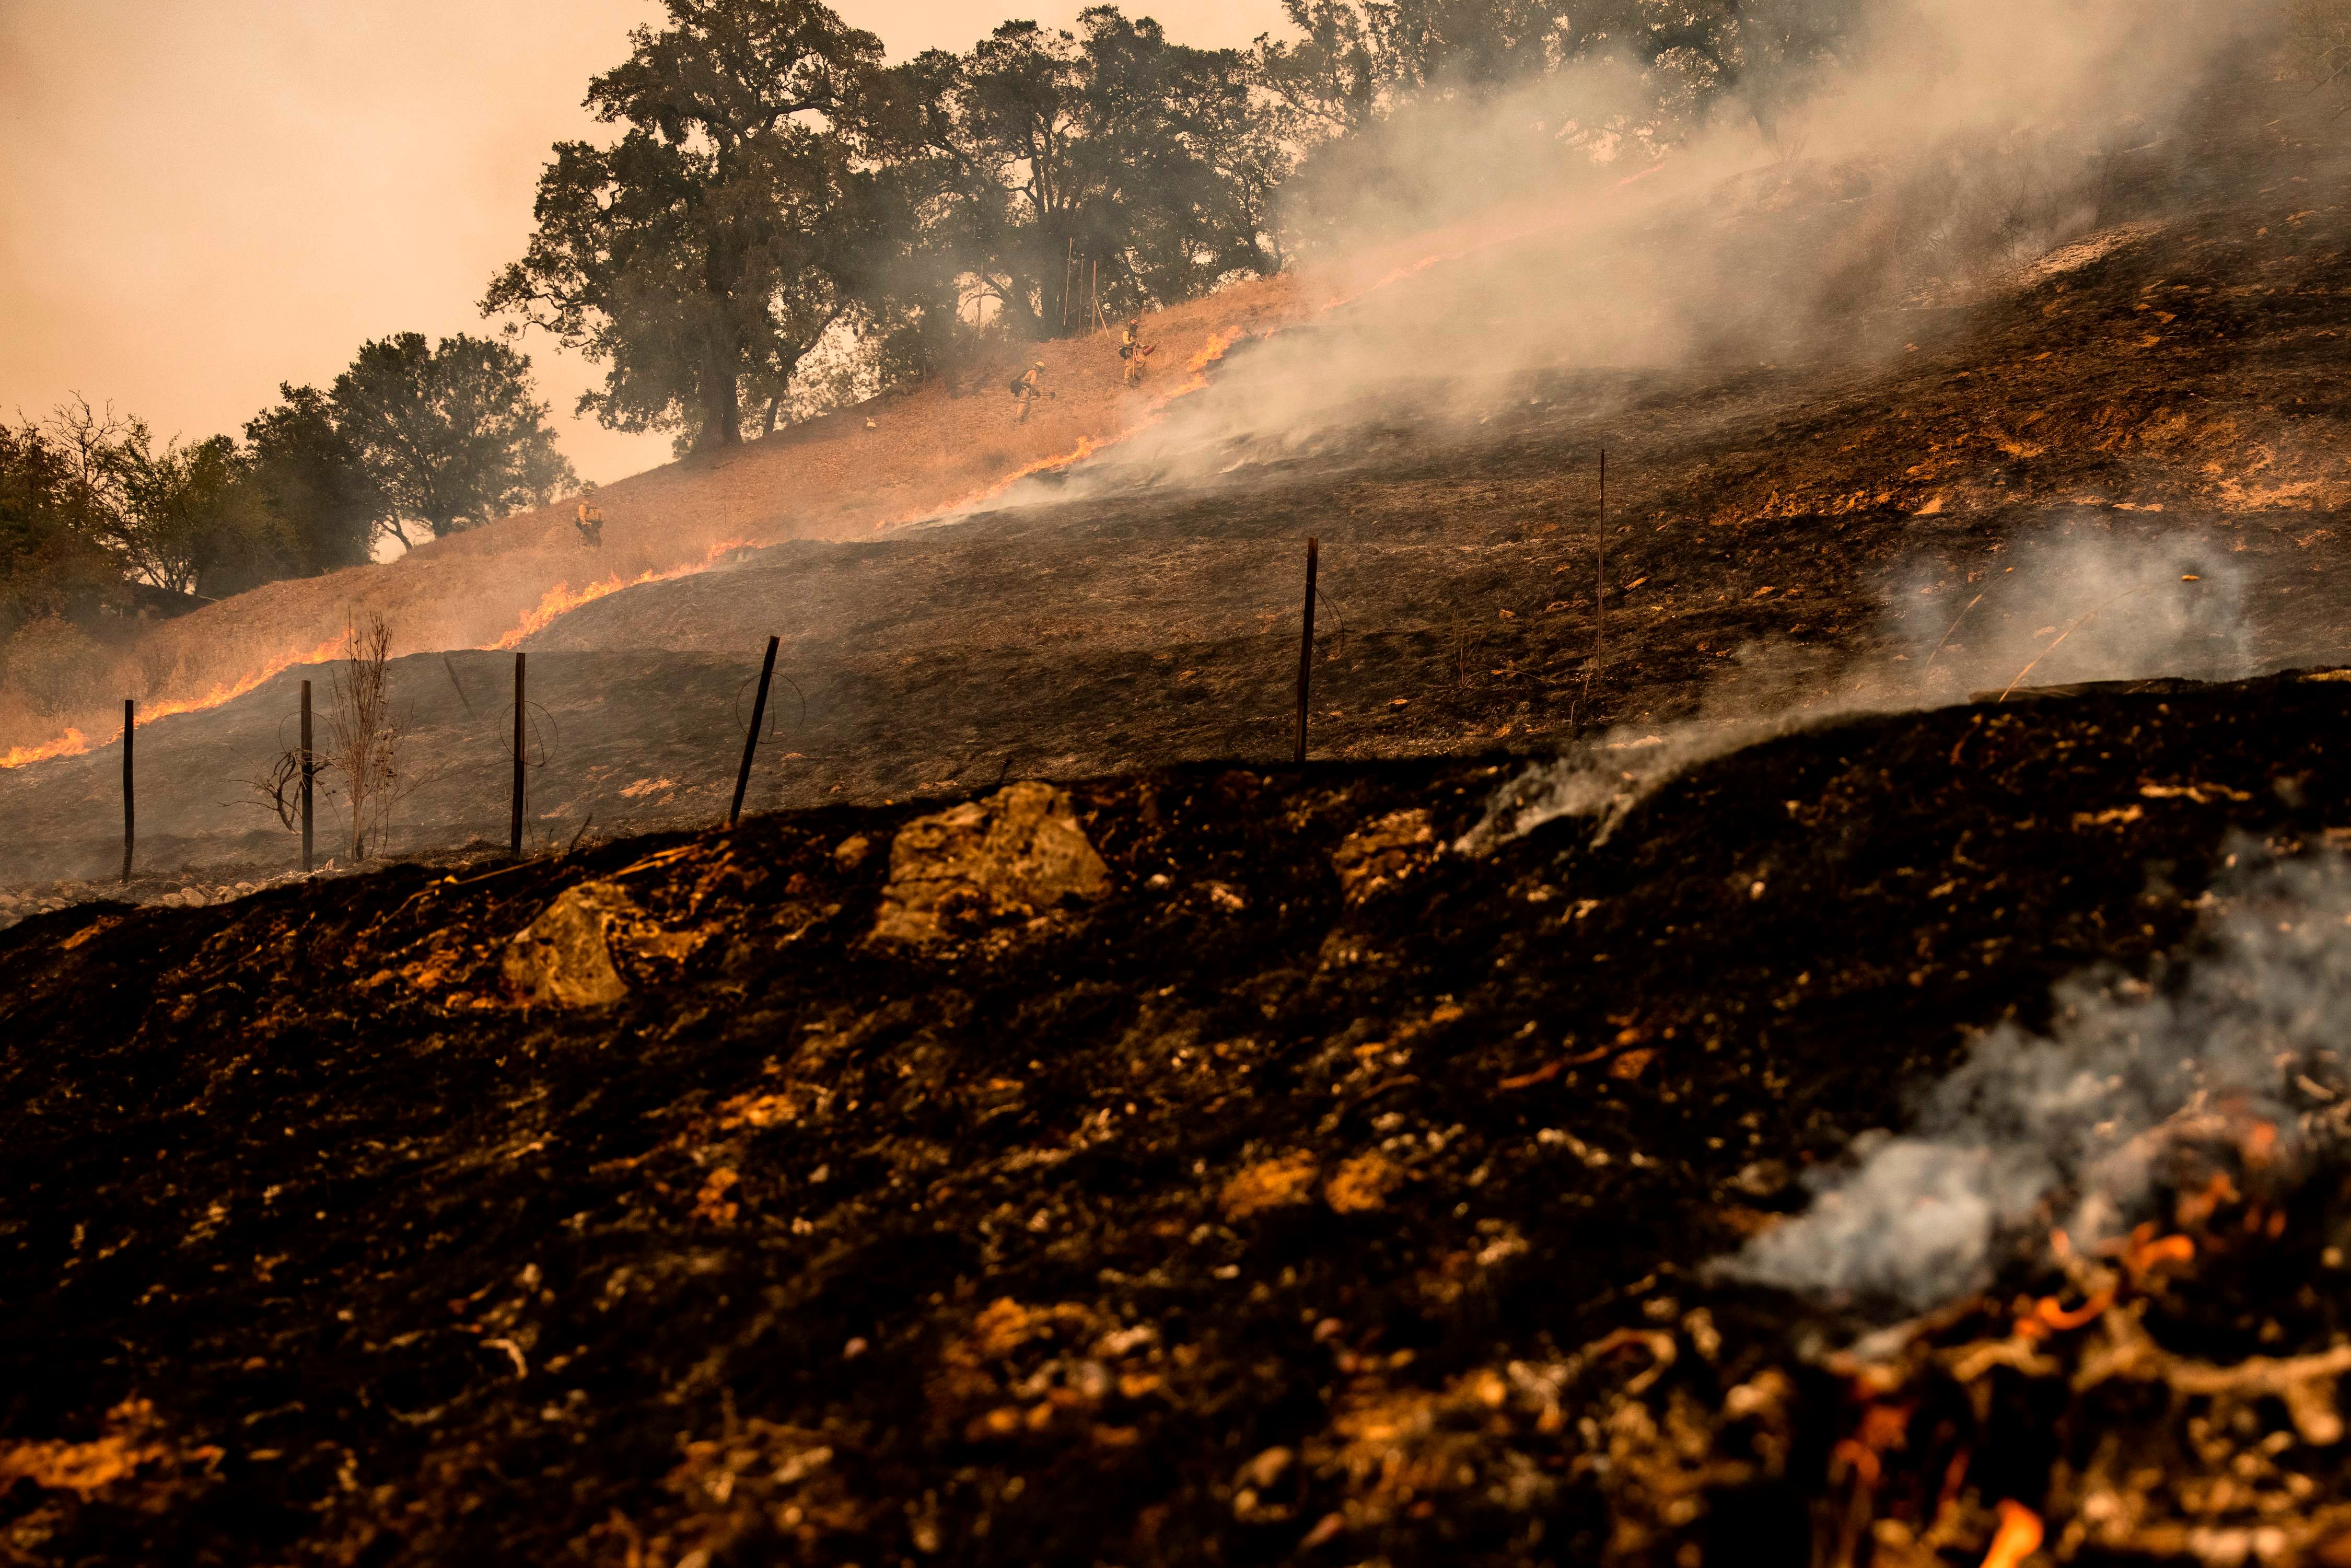 Fire Fighters watch as the edge of the fire creeps across a field towards a fire line they scrapped into the earth with hand tools as the Glass Fire continues to burn in Napa Valley, California. Credits: AFP Photo